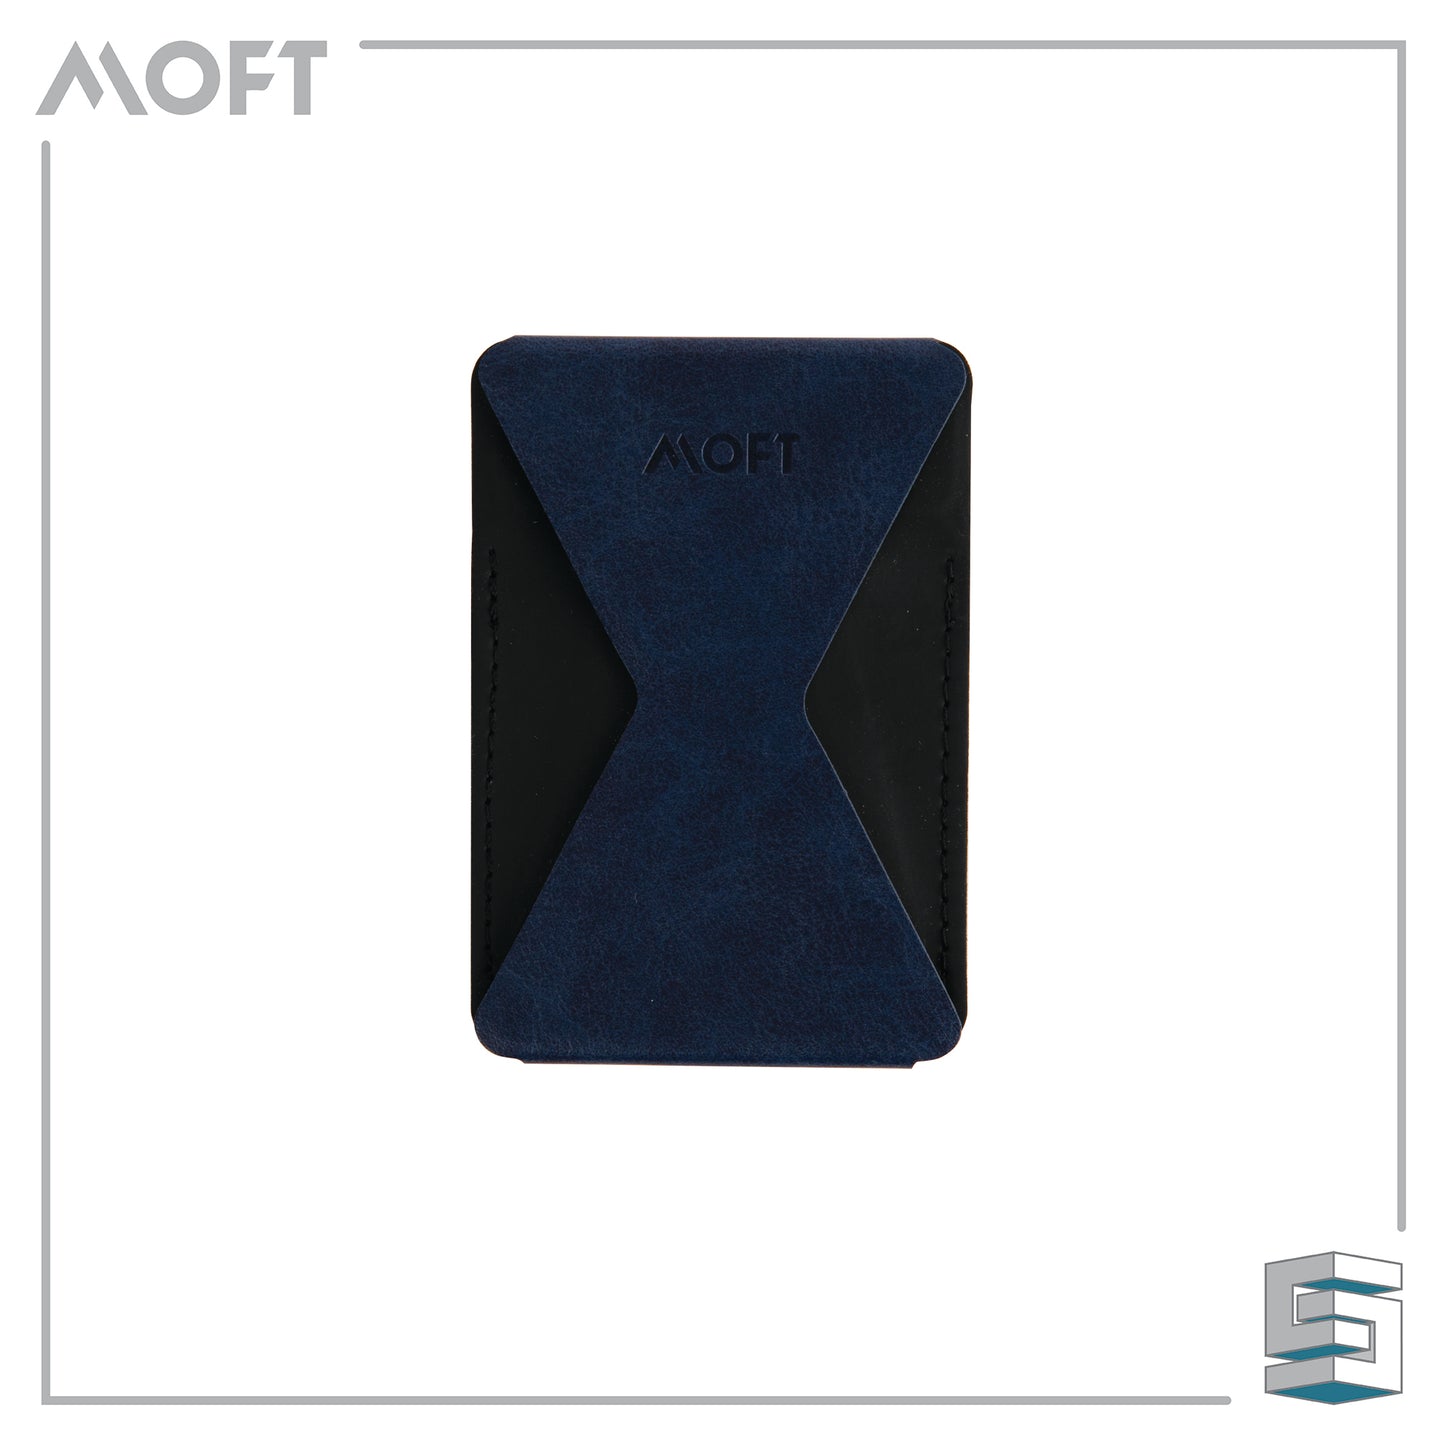 Phone Stand - MOFT X Phone Stand & Wallet (Adhesive) Global Synergy Concepts